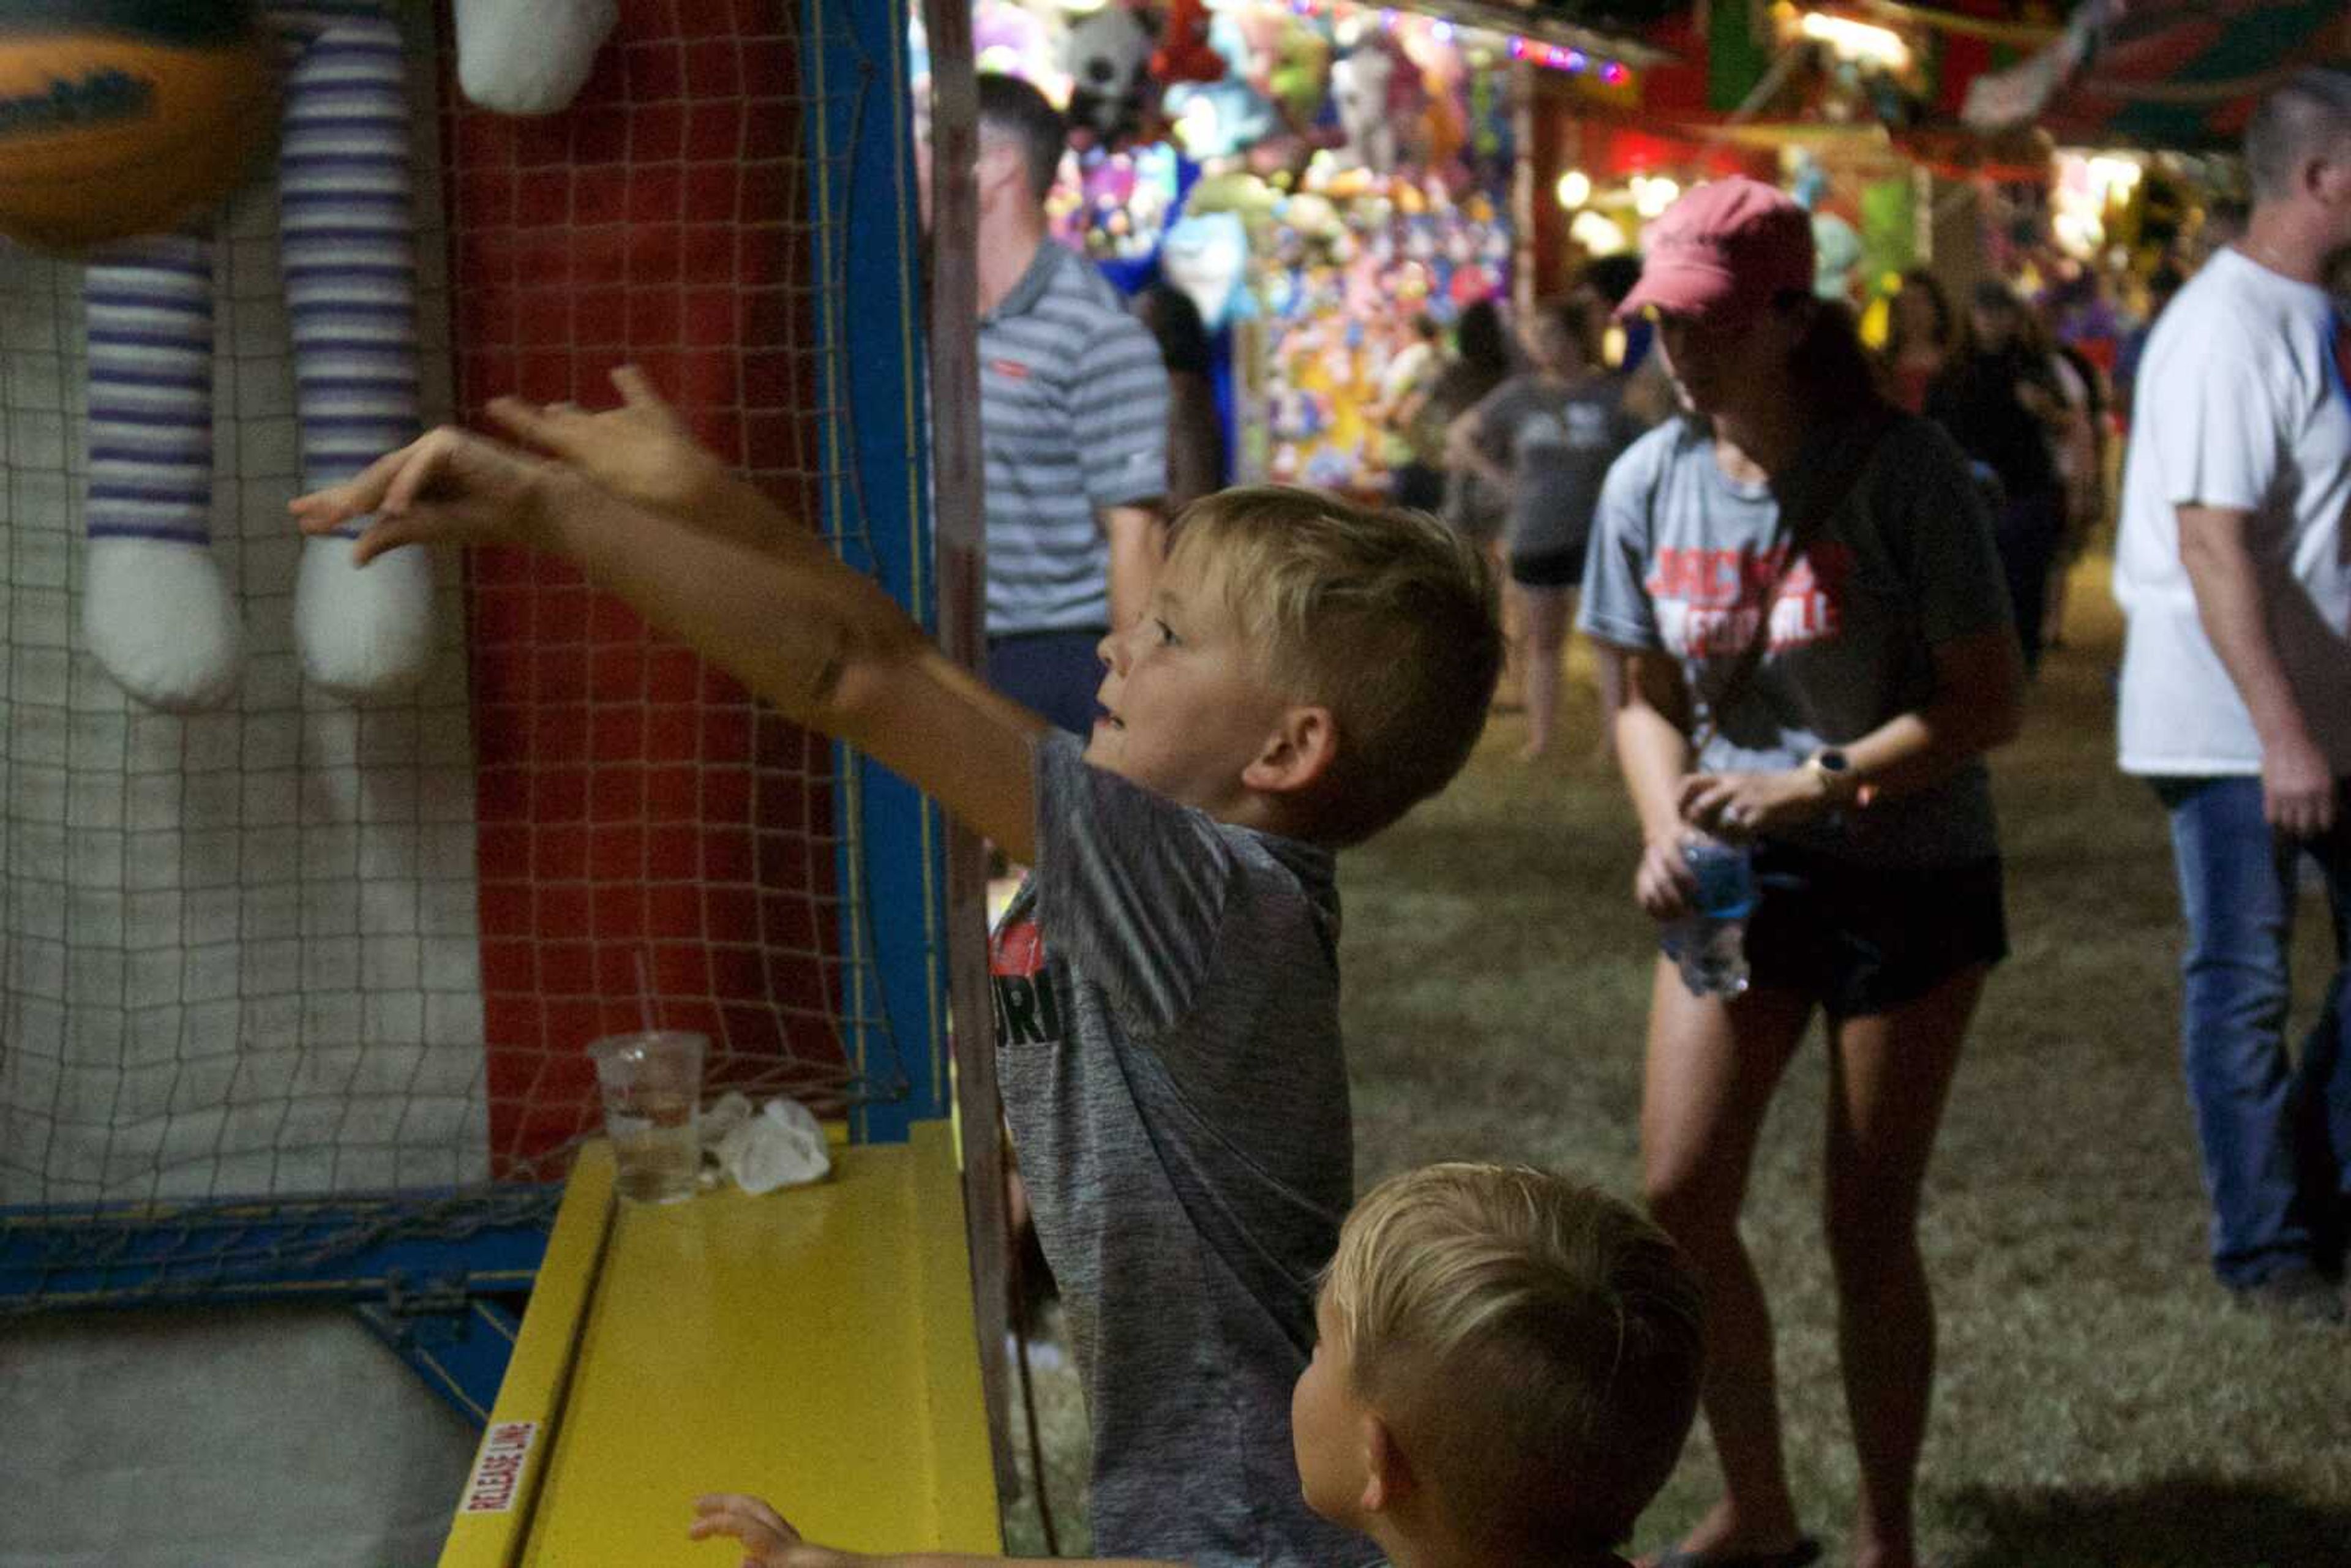 Community member Hugh Moon shoots a basket at a booth at the SEMO District Fair on Wednesday, Sept. 11.